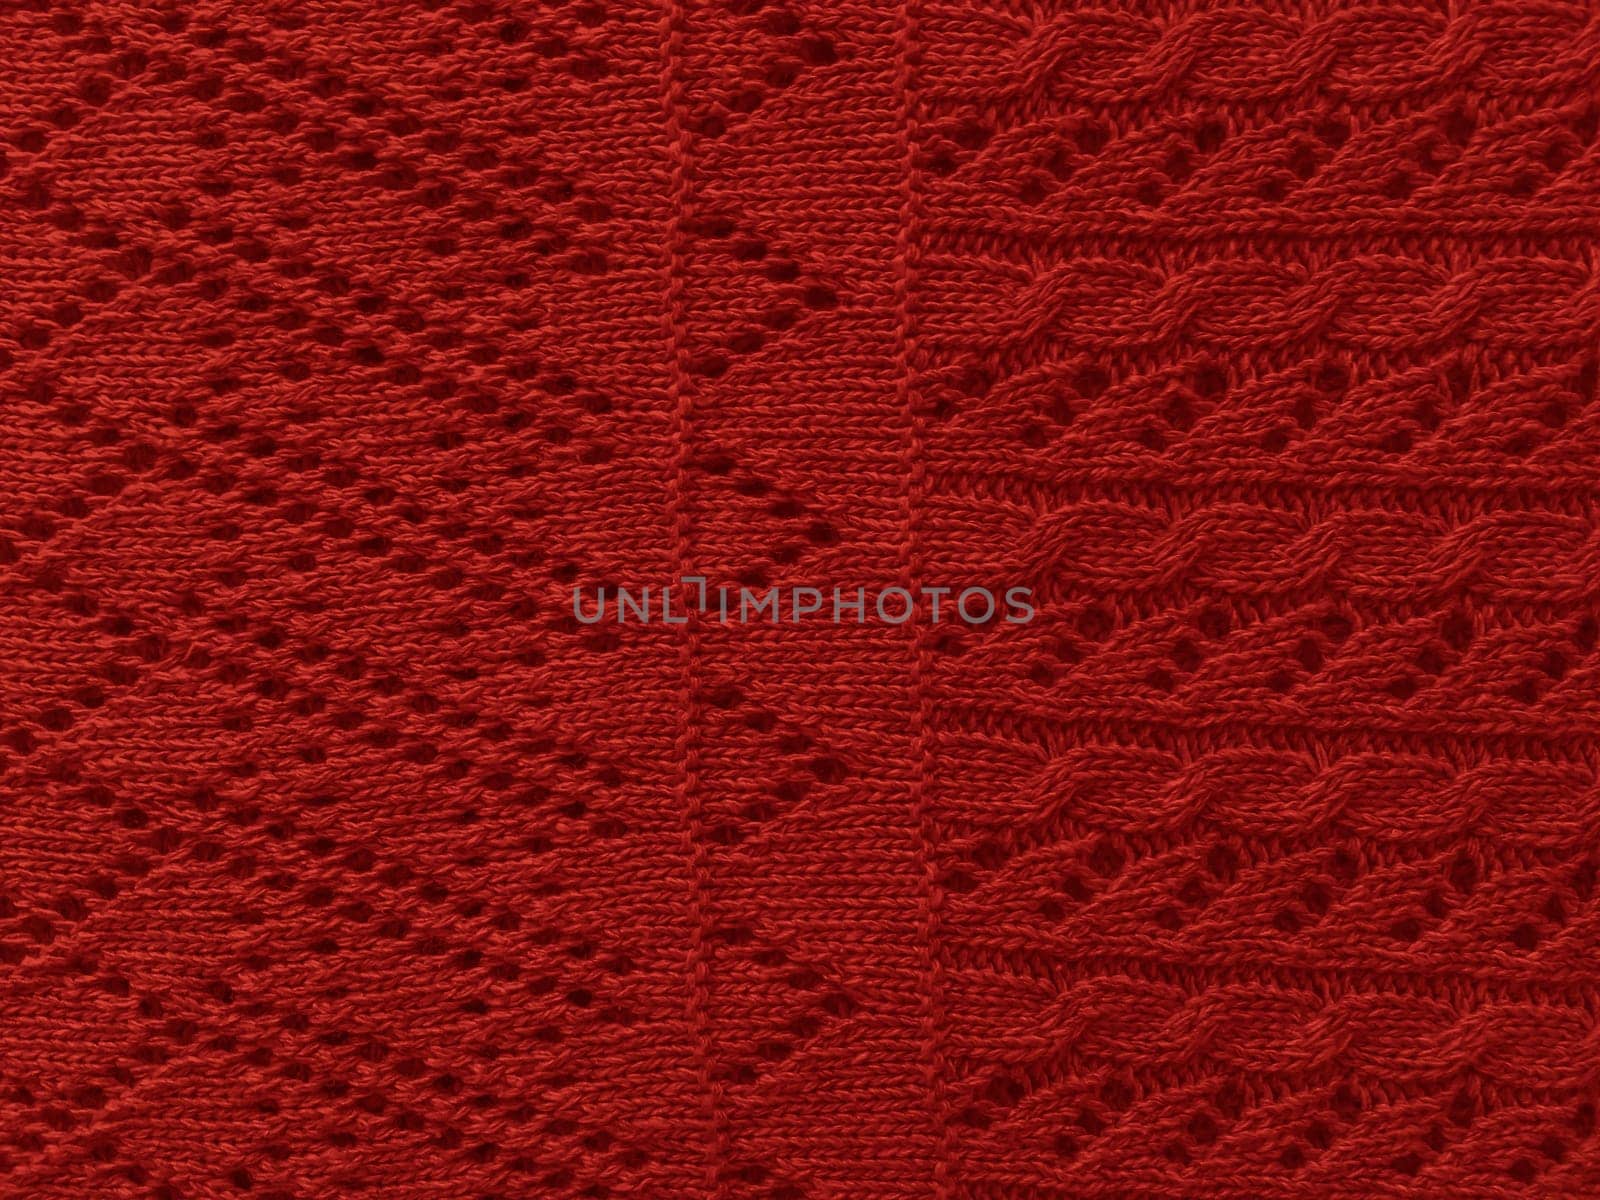 Christmas Knitted Texture. Vintage Weave Canvas. Soft Scandinavian Wallpaper. Xmas Knitted Background. Organic Woven Ornament. Cotton Knitwear Thread Material. Red Xmas Knitting Pattern.